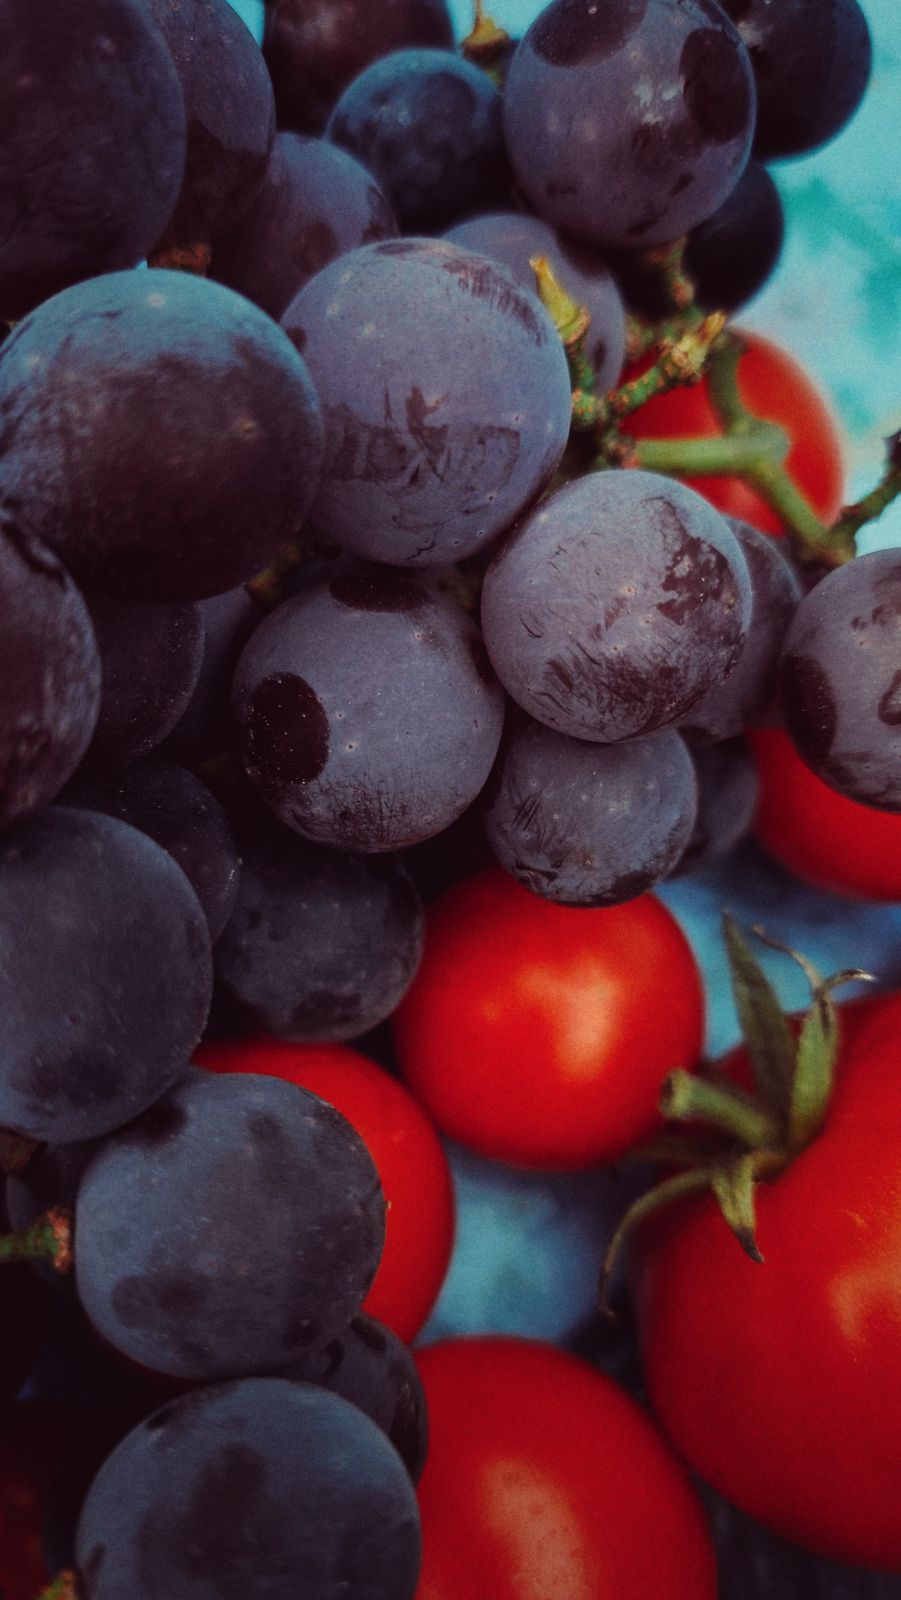 Tomatoes and blue grapes, close-up.